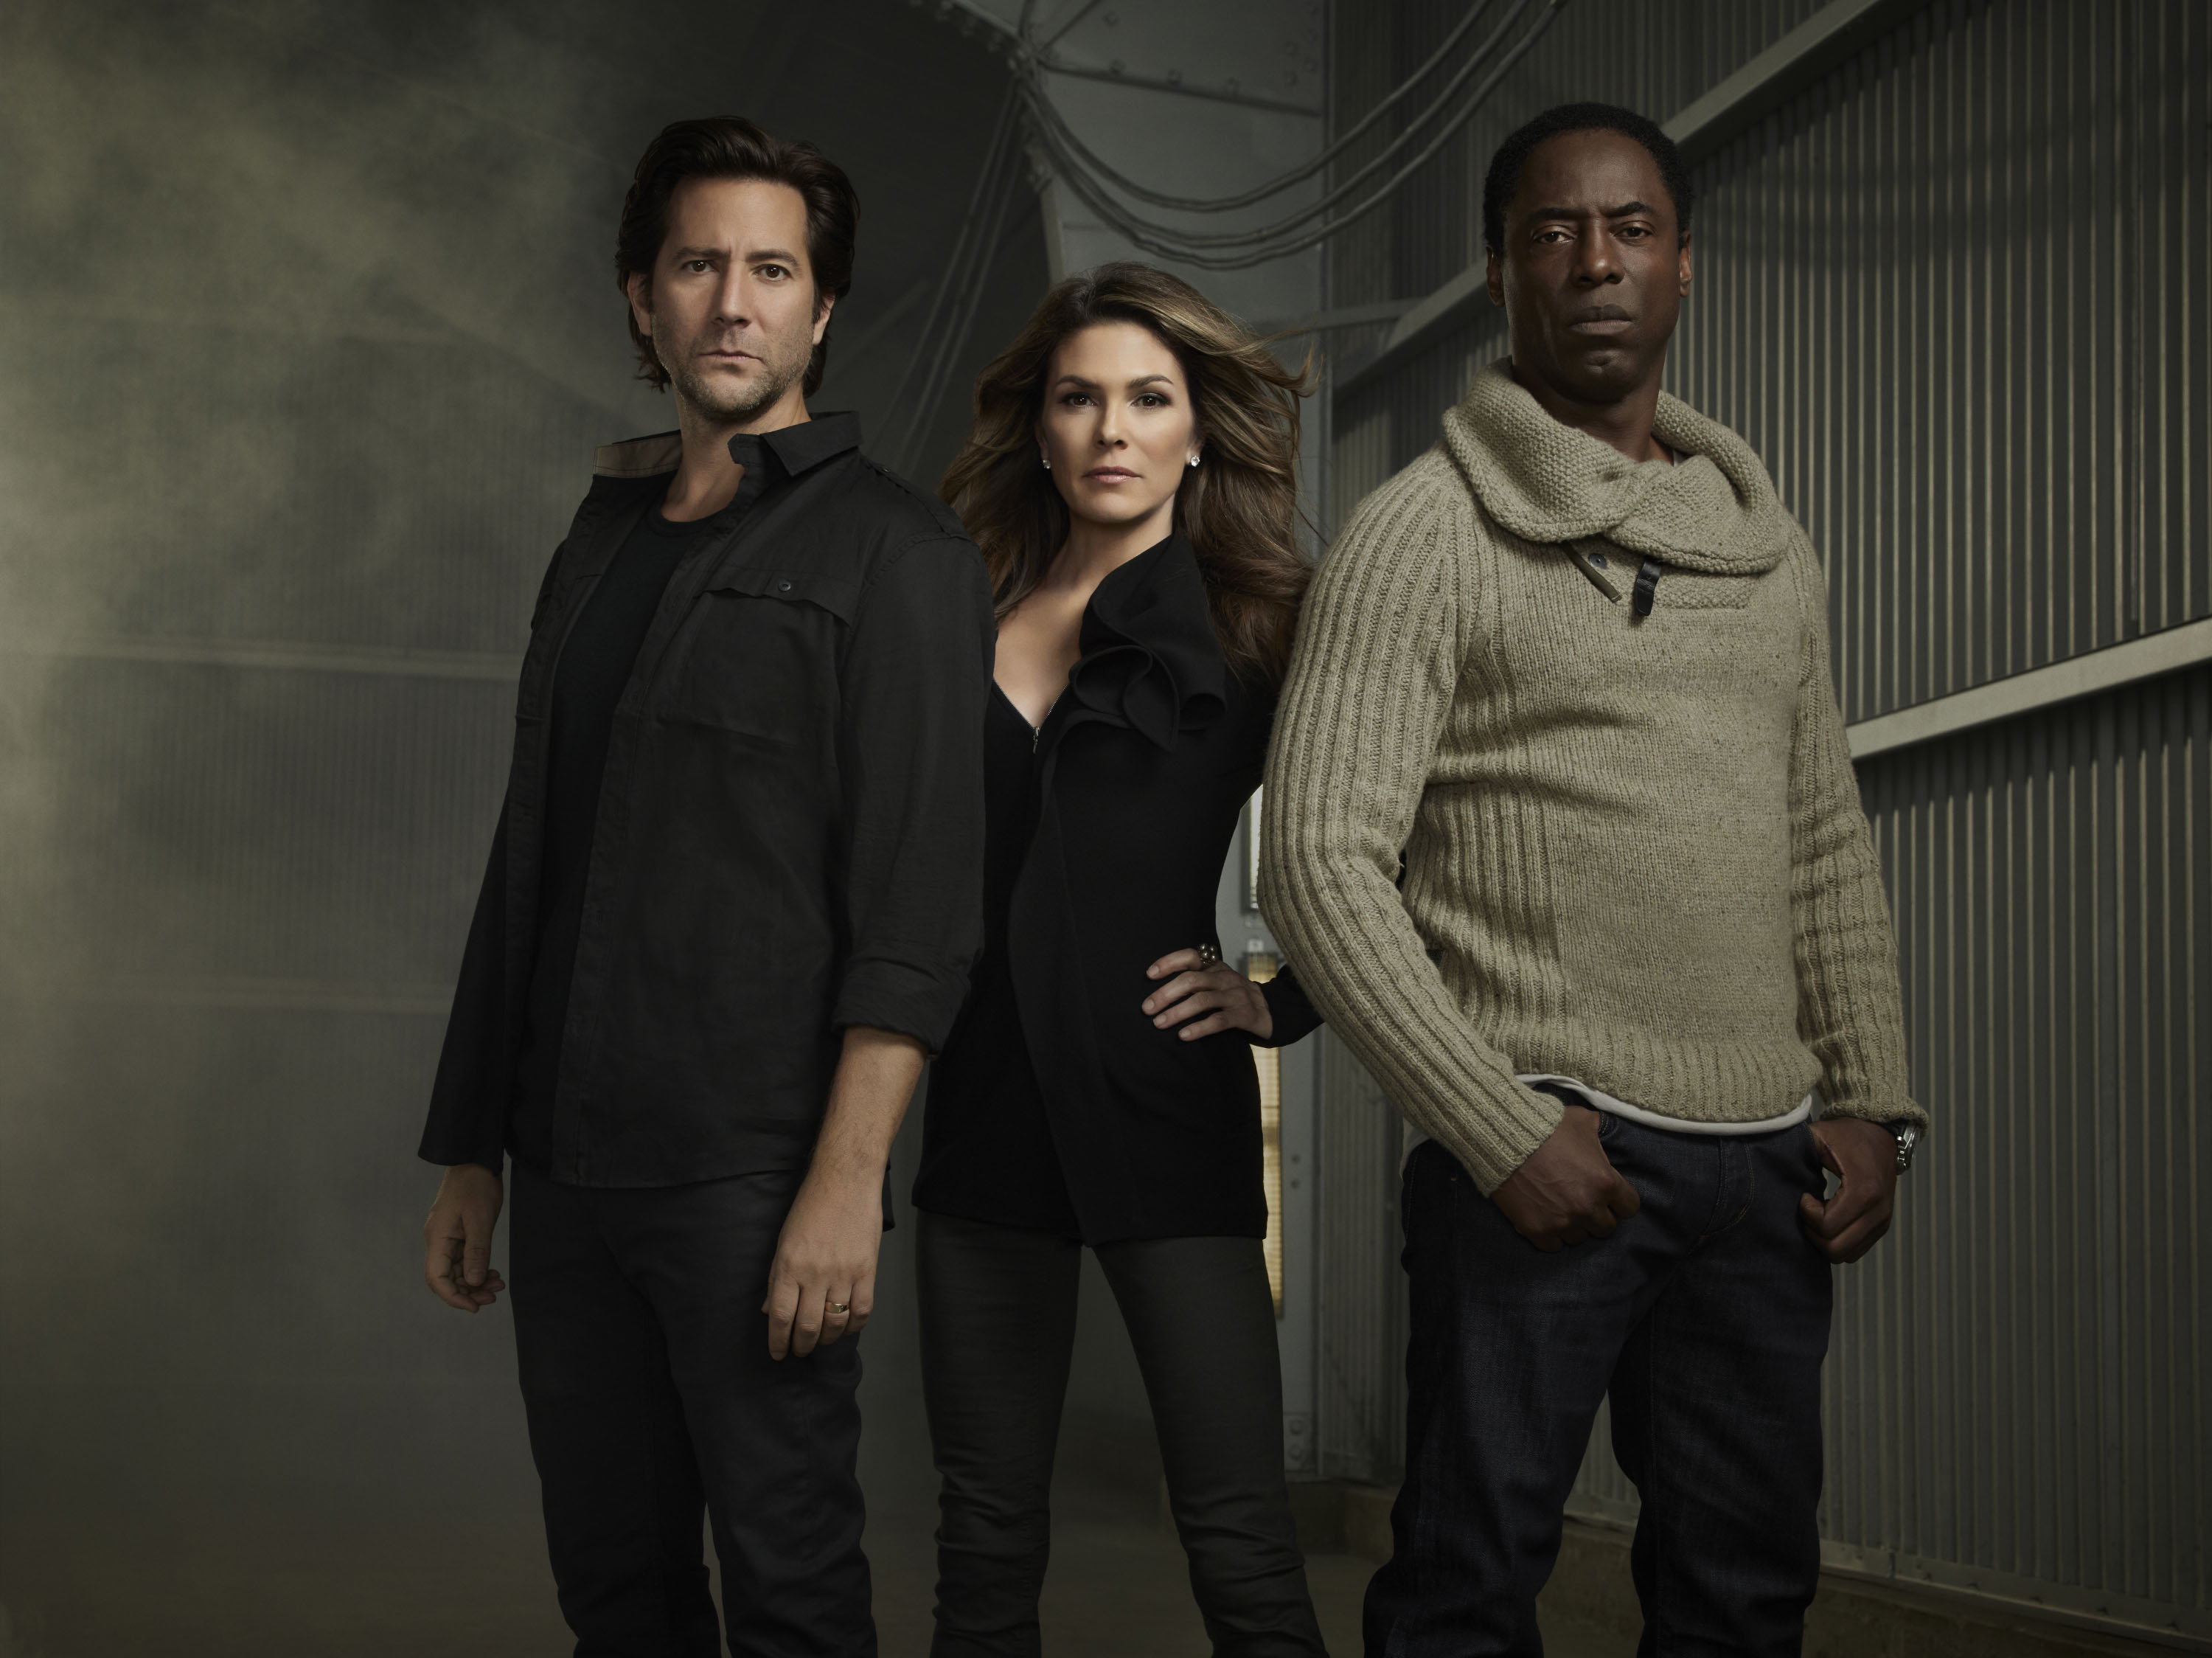 (L-R): Henry Ian Cusick, Paige Turco and Isaiah Washington star in the sci-fi drama series THE 100, airing Wednesdays at 9/8c on The CW.